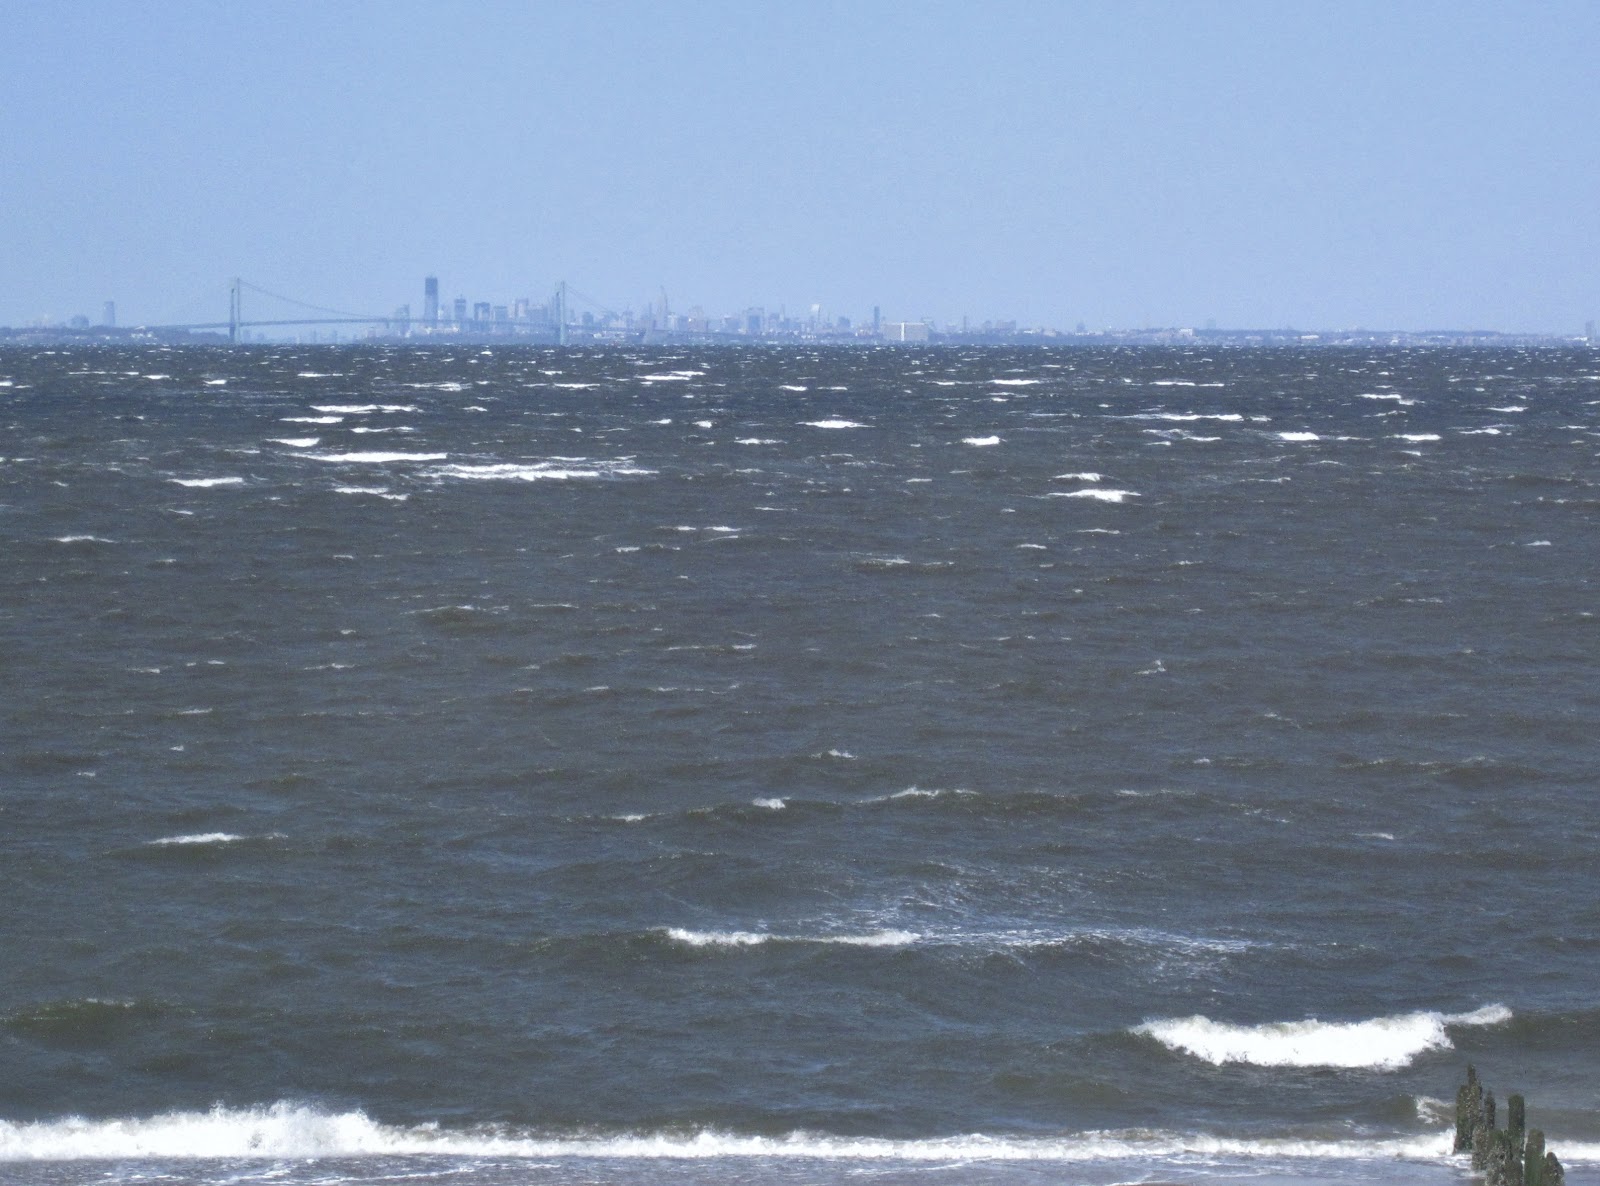 New York City In The Background With A Choppy Lower Bay Seen